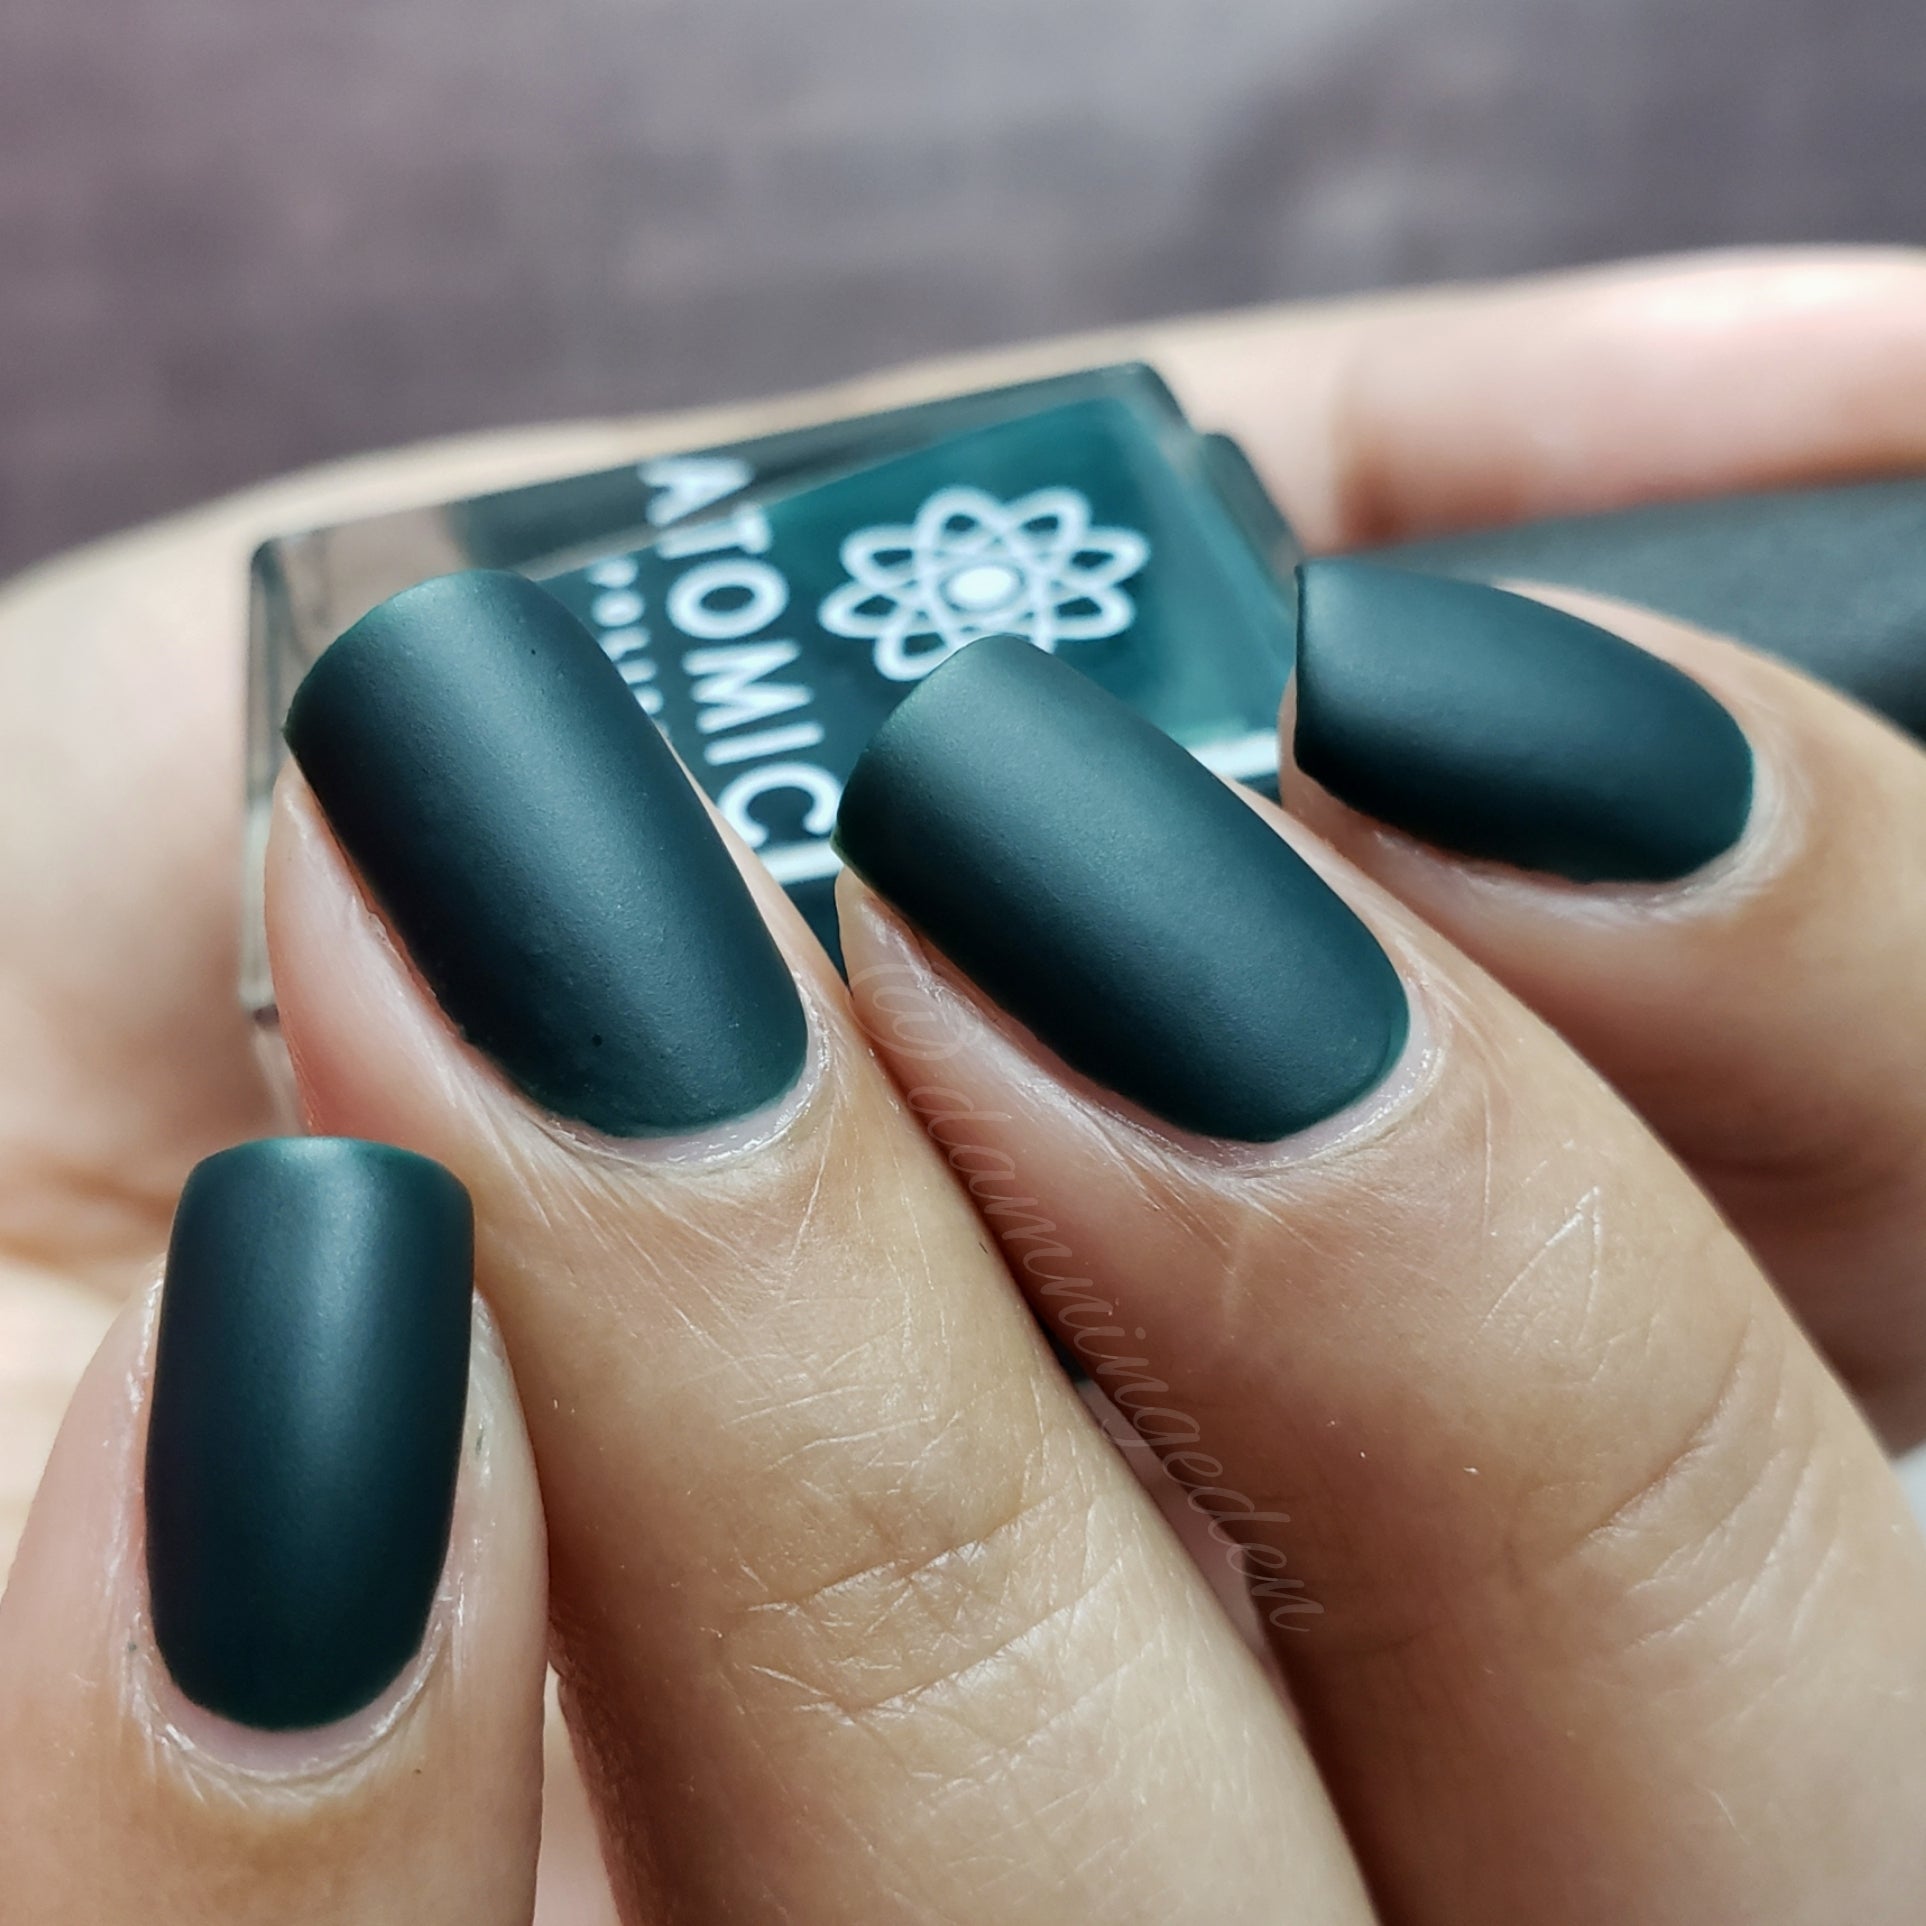 Buy Black Out-matte Nail Polish Large 15ml Online in India - Etsy